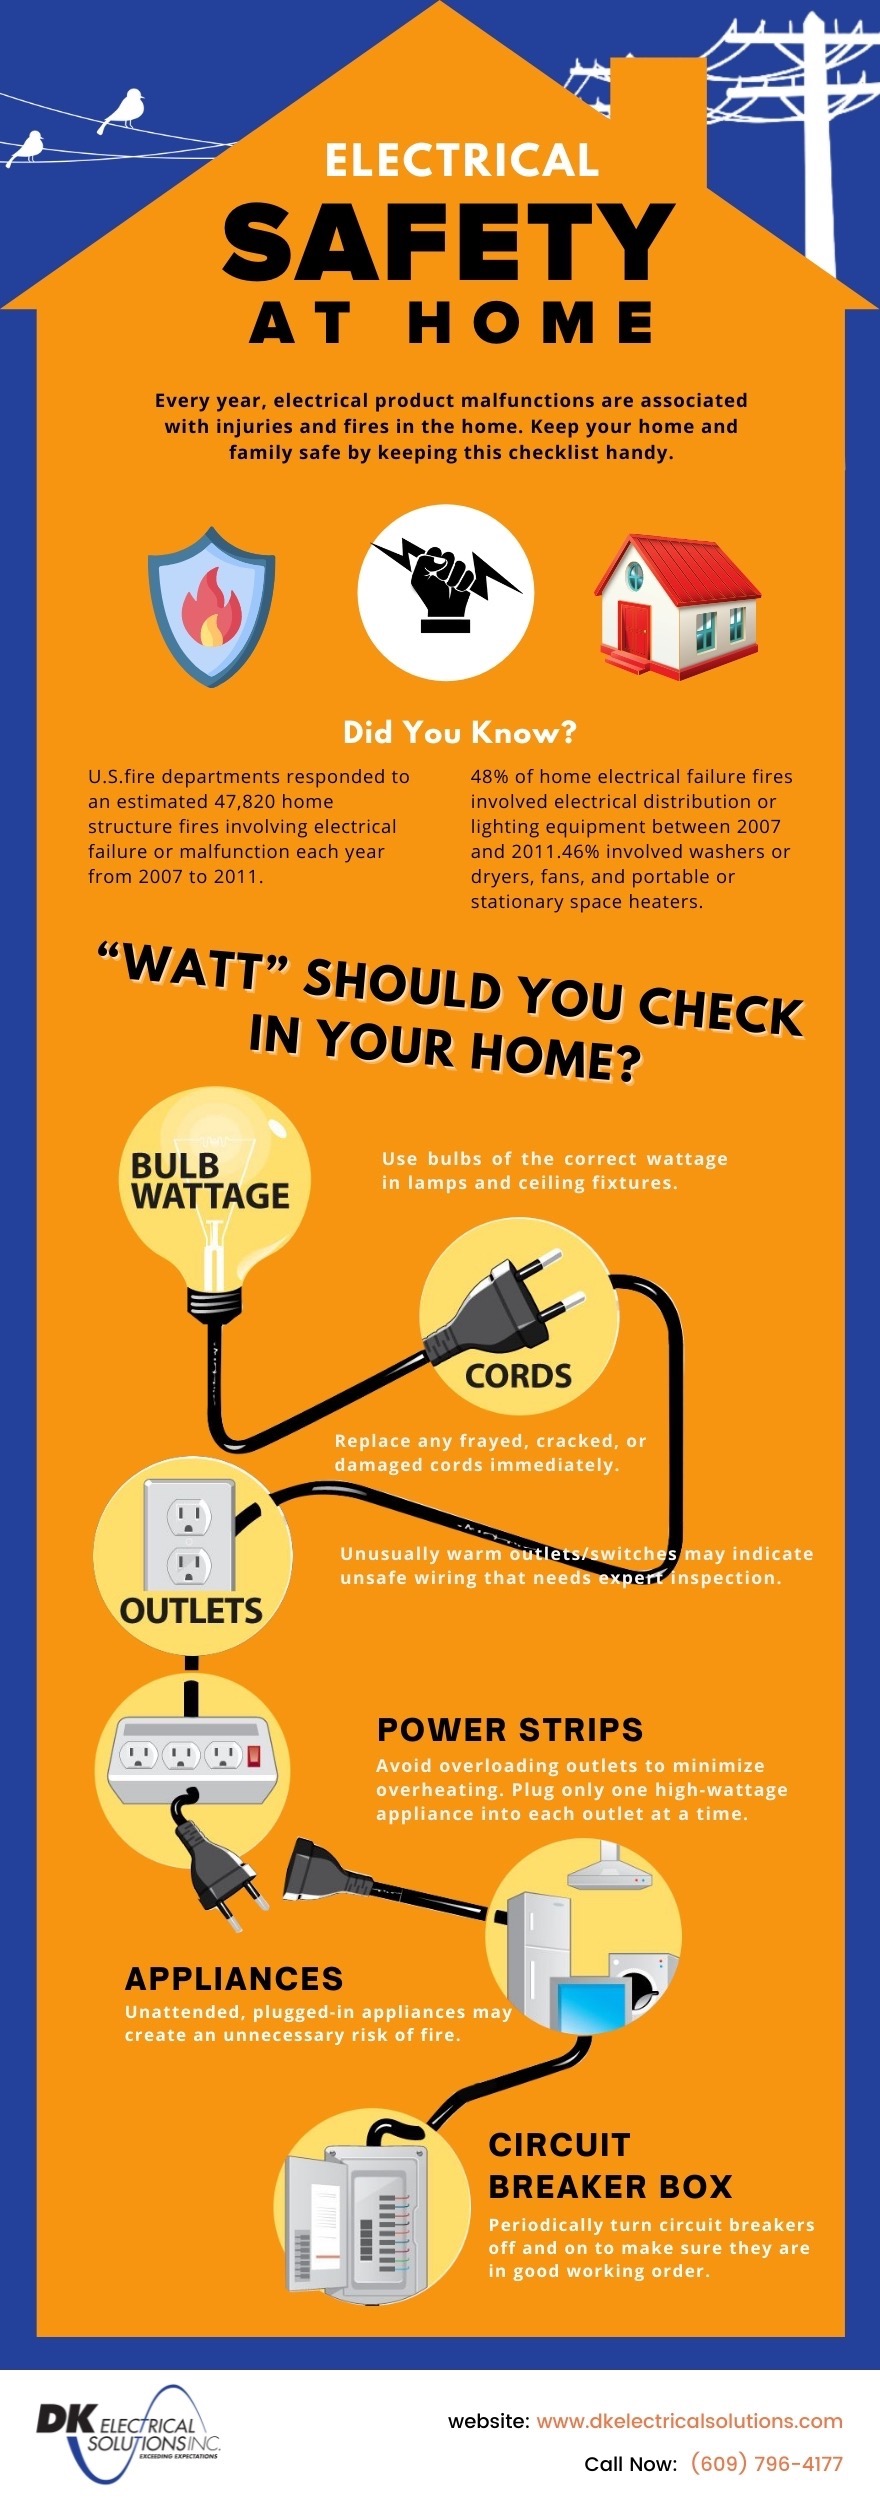 Electrical safety at home infographic - DK Electrical Solutions